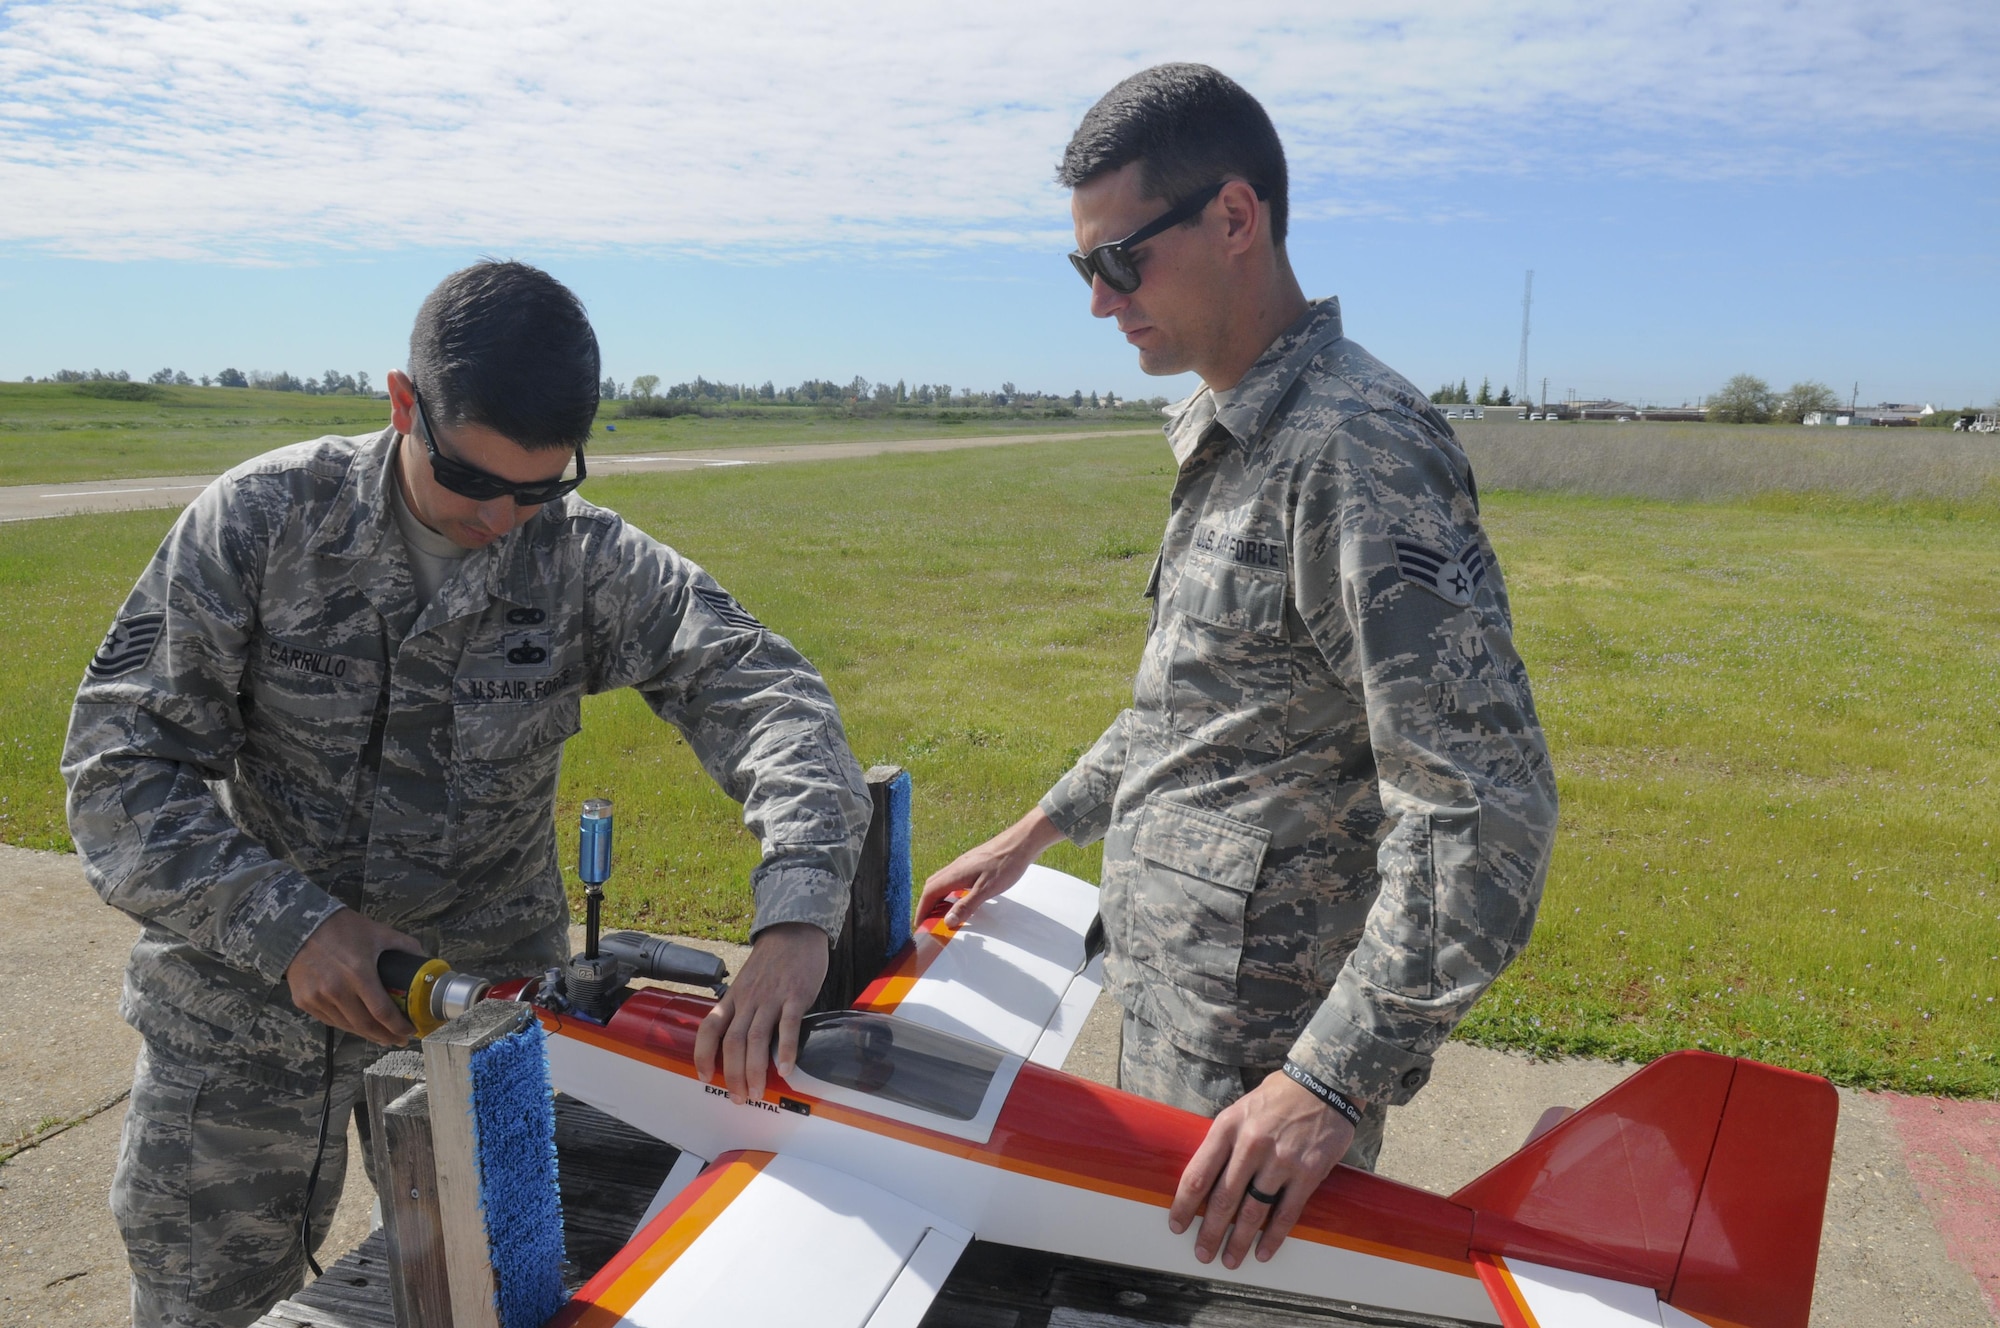 Tech. Sgt. Michael Carrillo (left) and Senior Airman Justin Joyner, 349th Air Mobility Wing Detachment 1 KC-135 crew chiefs, prep a radio-controlled plane for flight at Beale Air Force Base, California March 25, 2016. Carrillo is a member of the Beale Blackbirds Radio Control Club. (U.S. Air Force photo by Senior Airman Michael J. Hunsaker)